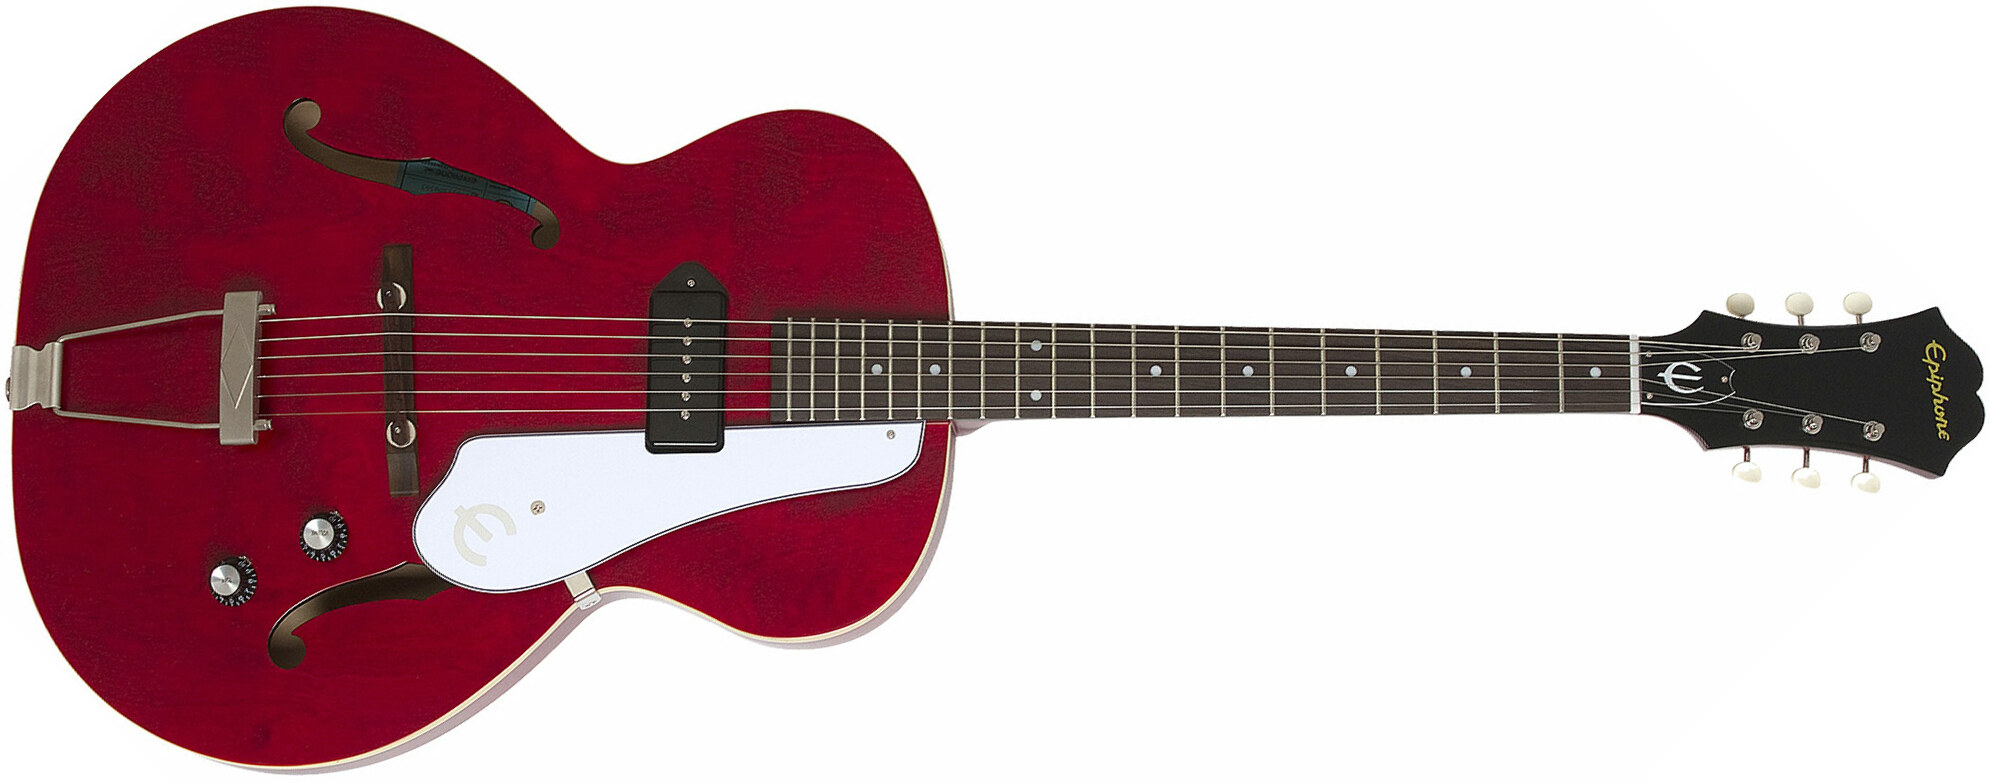 Epiphone Inspired By 1966 Century 2016 - Aged Gloss Cherry - Semi hollow elektriche gitaar - Main picture